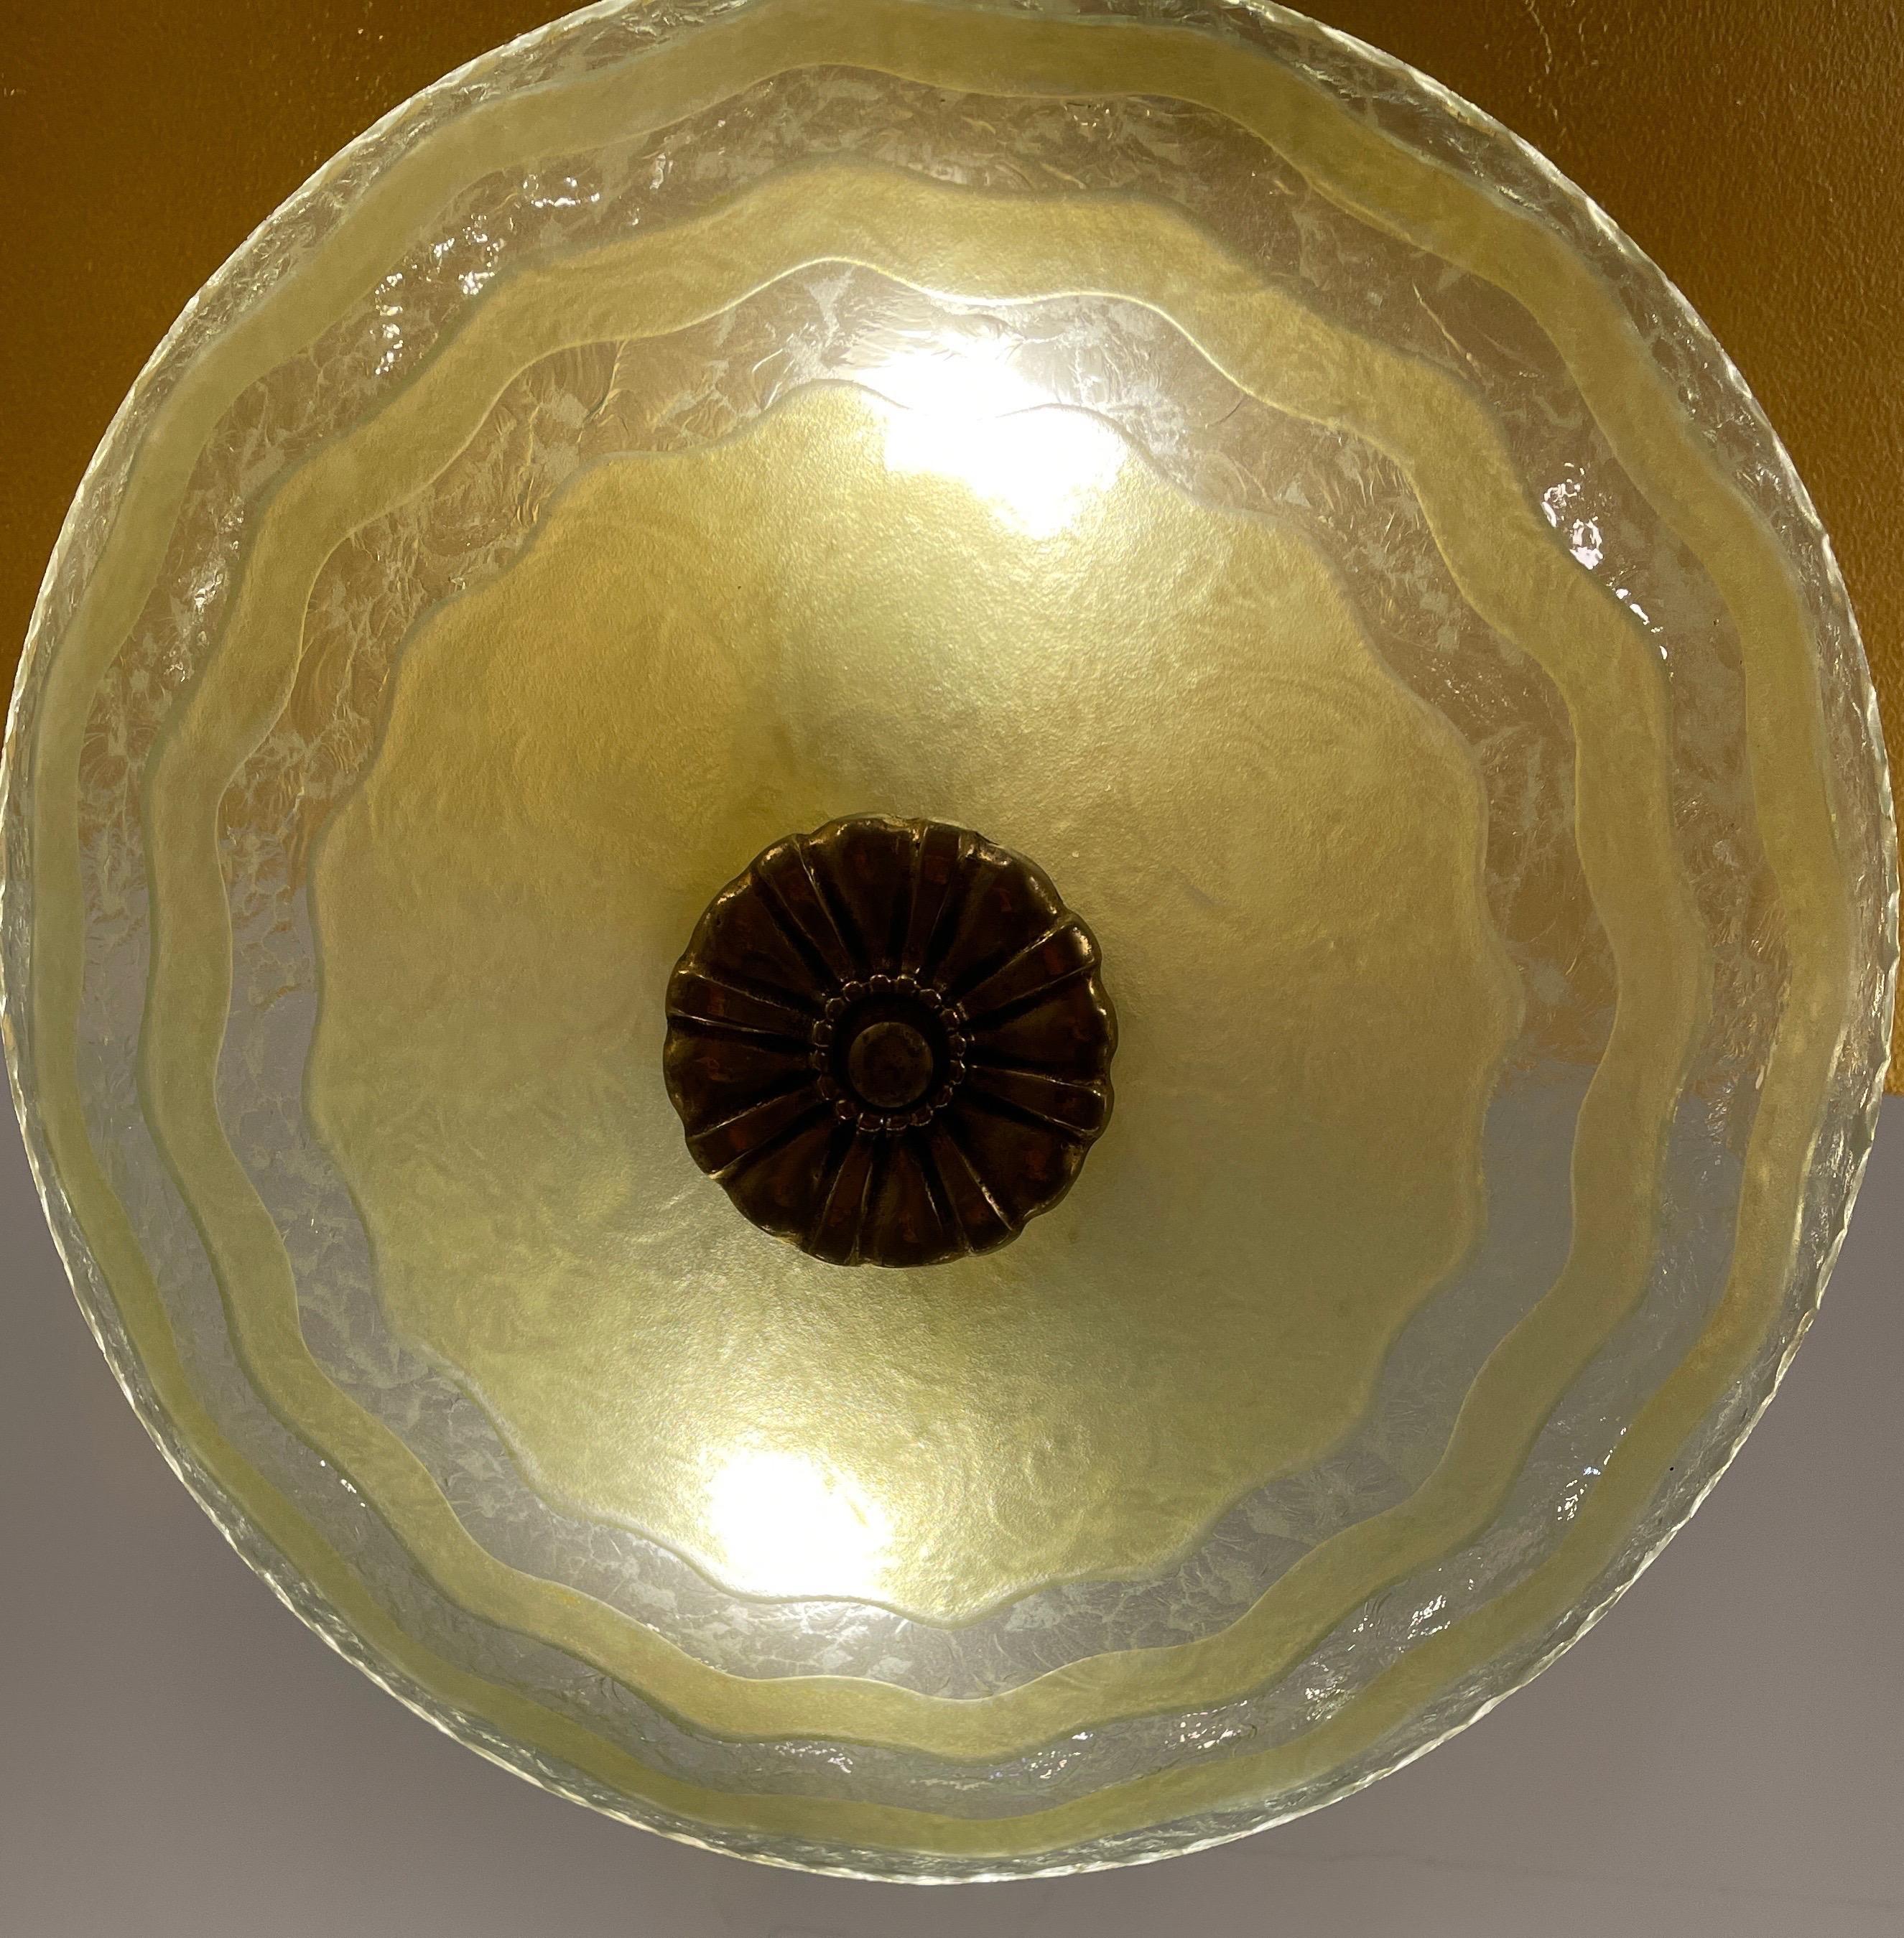 This lovely fixture relies on molded textured glass on the interior surface and wavy carving and a stain on the exterior surface to create the happy, stylized floral pattern. A brass medallion affixes the hardware to the glass. Currently rewired to